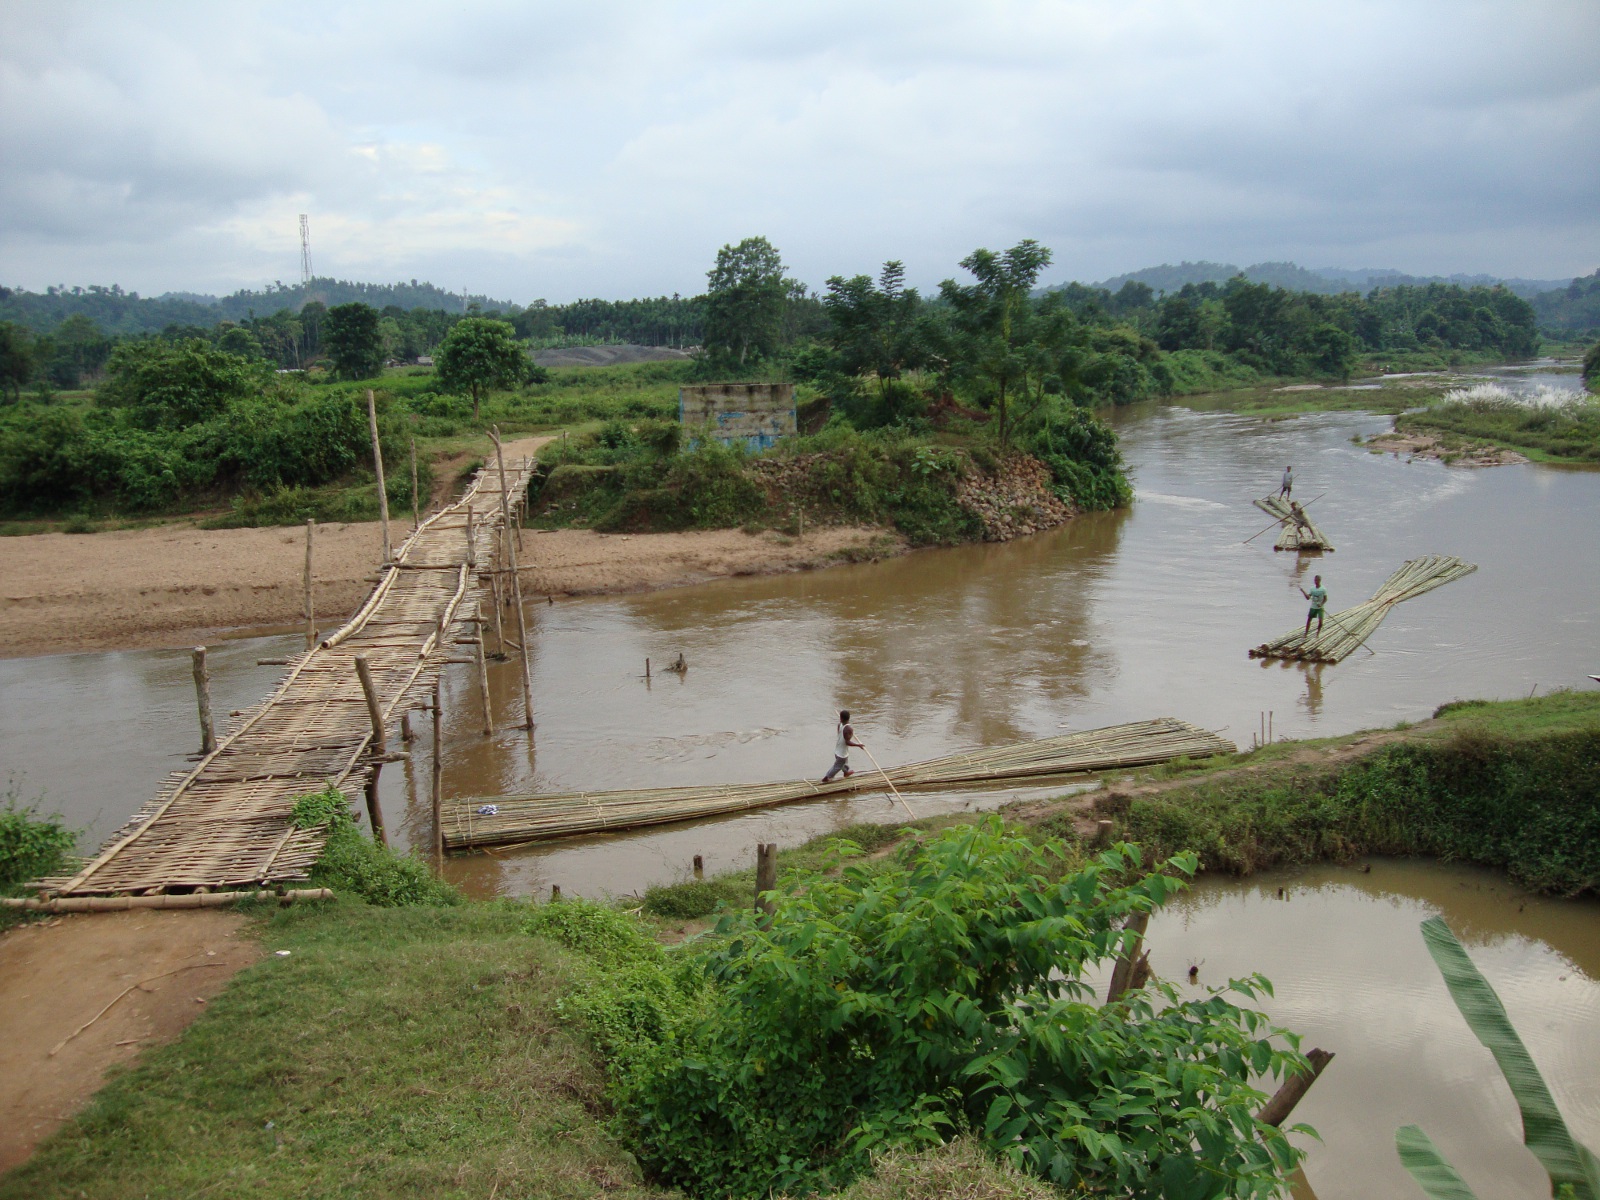 Wooden and bamboo bridge over the Jinari River (left). The bridge is built next to an incomplete concrete bridge (top center). Rafts carry bamboo to market.